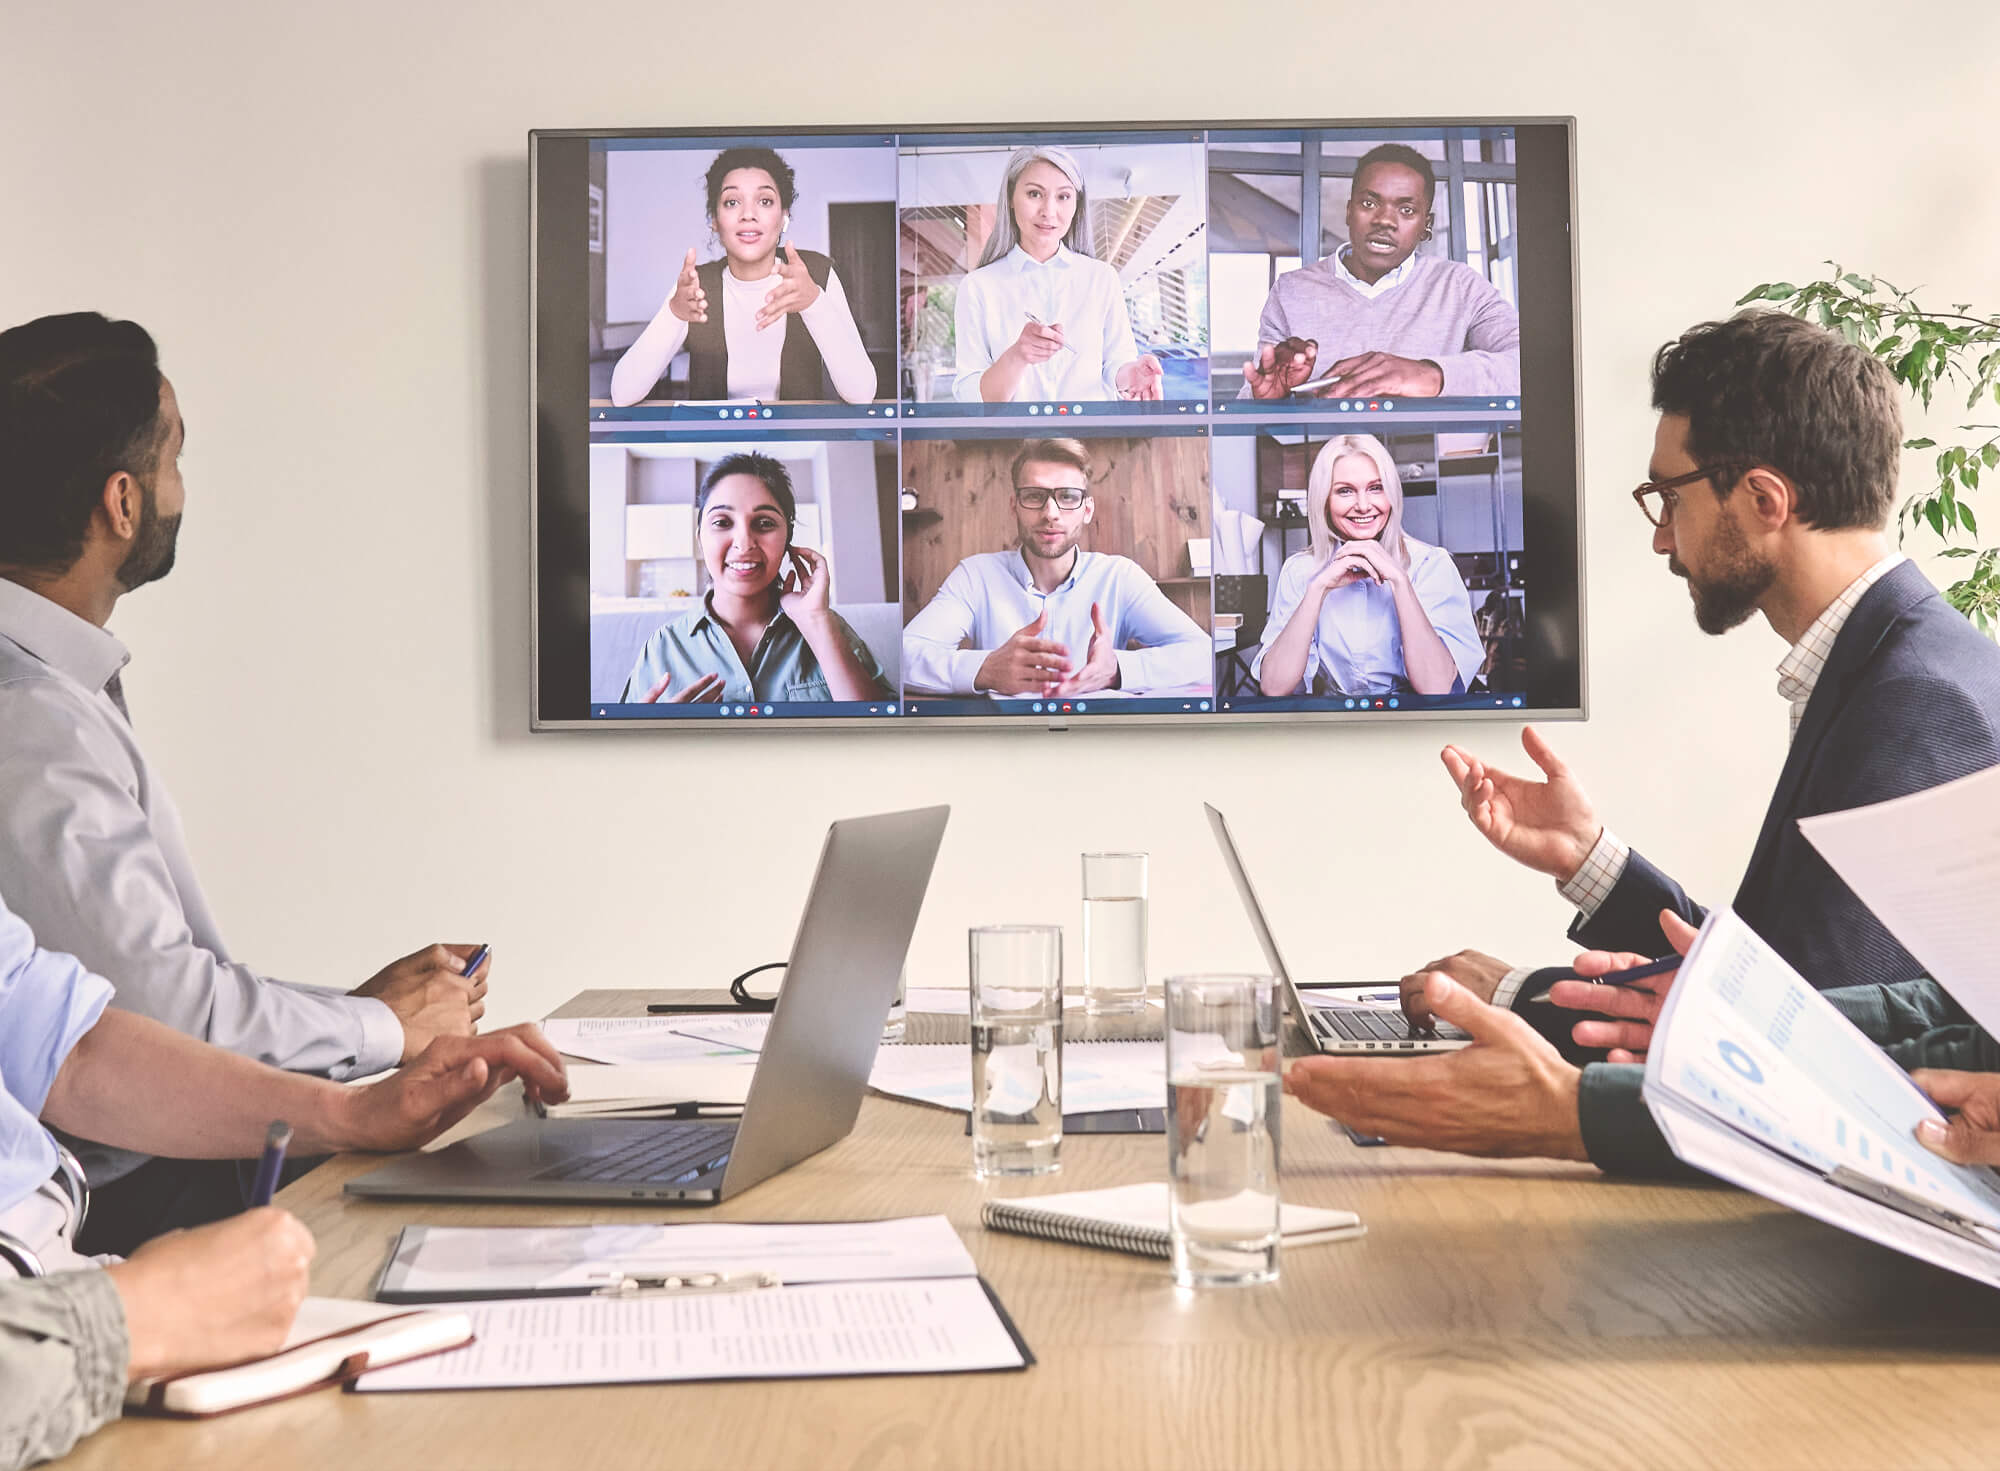 Team members on a video conference meeting